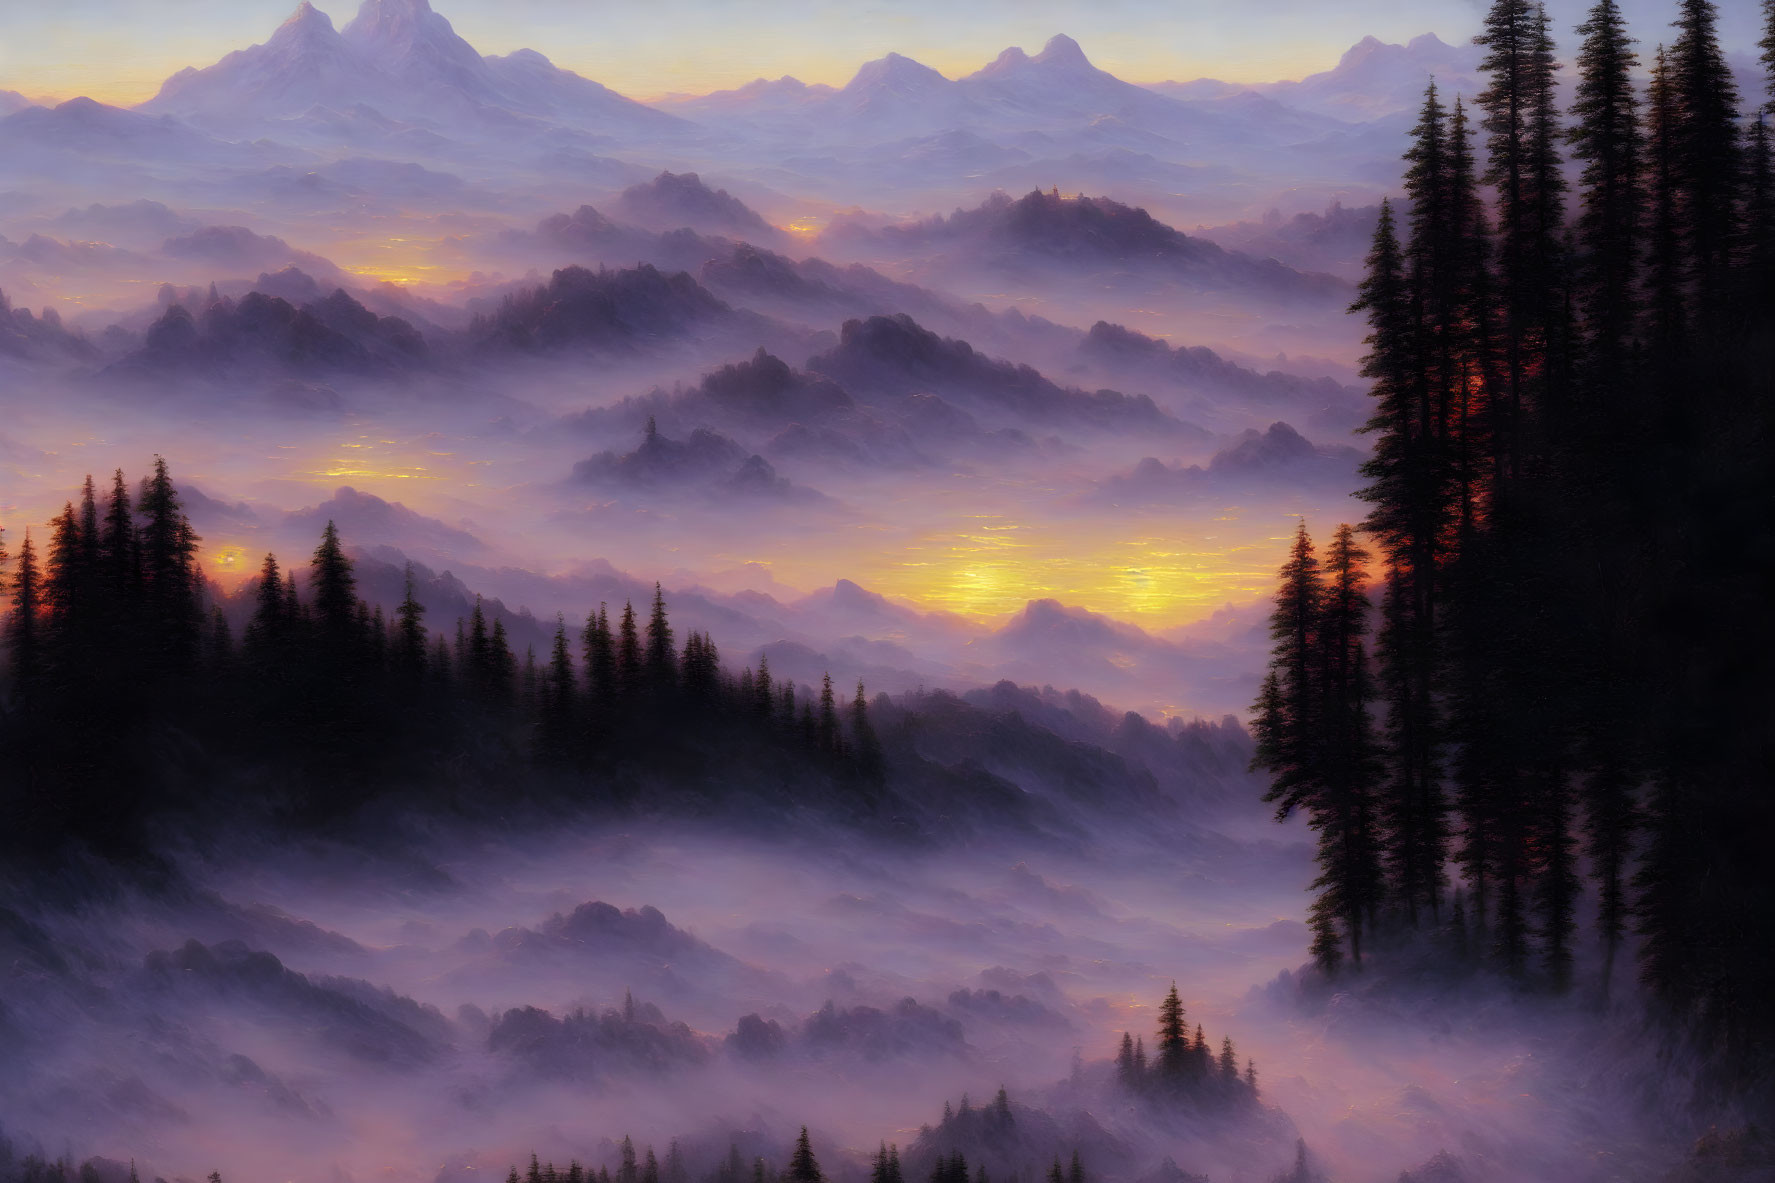 Foggy Mountain Landscape at Dawn with Pine Trees